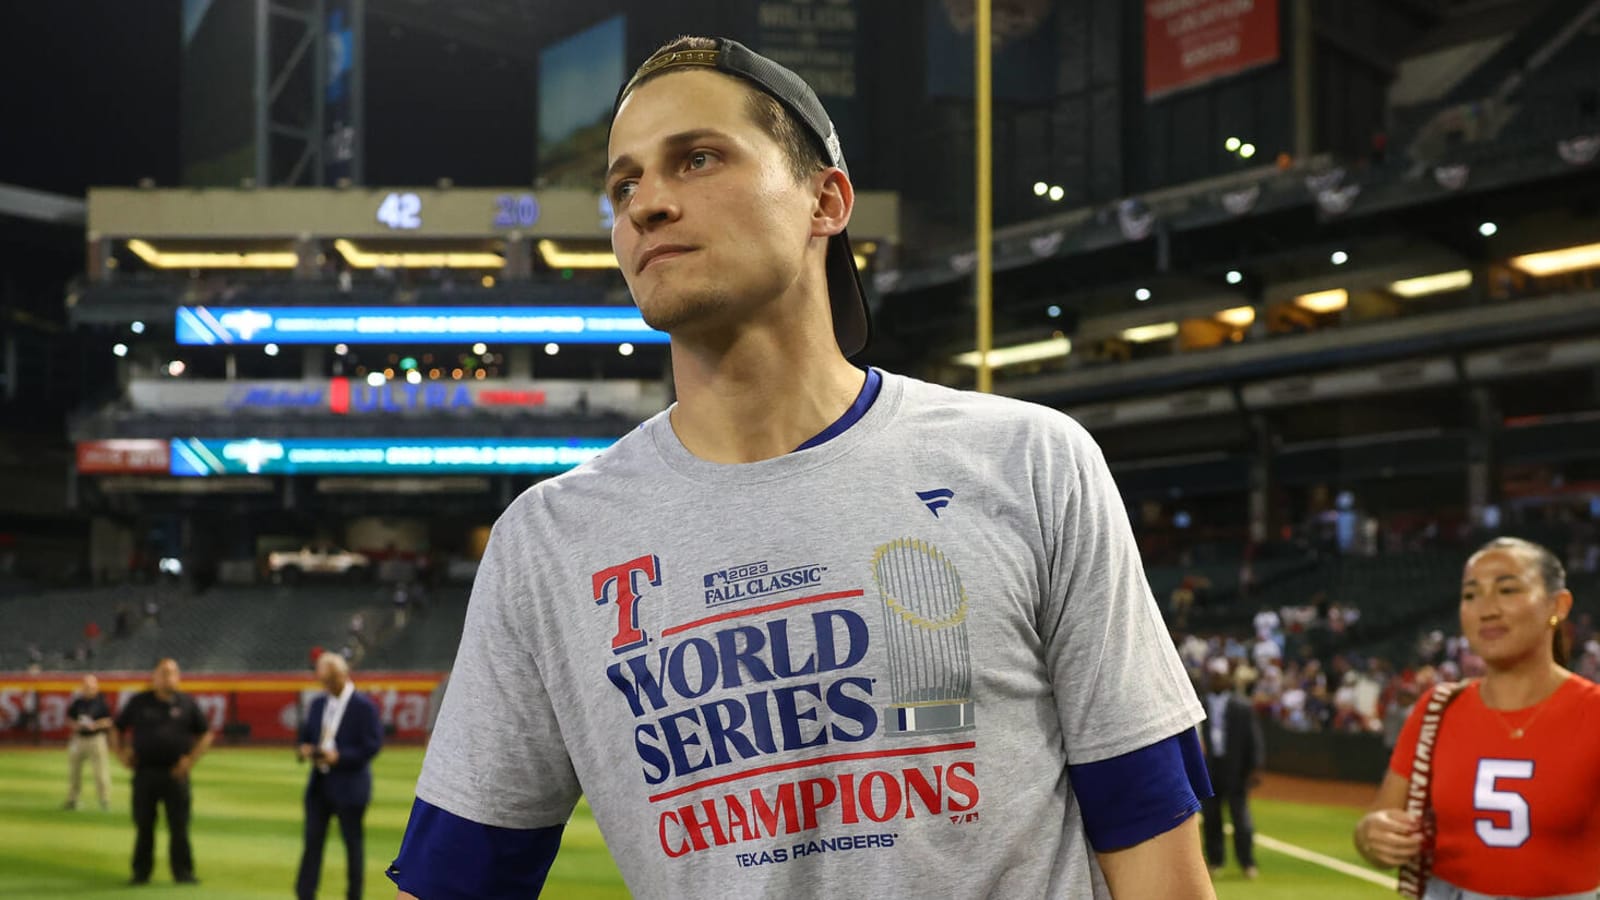 Rangers fan was determined to get Corey Seager’s autograph at World Series parade